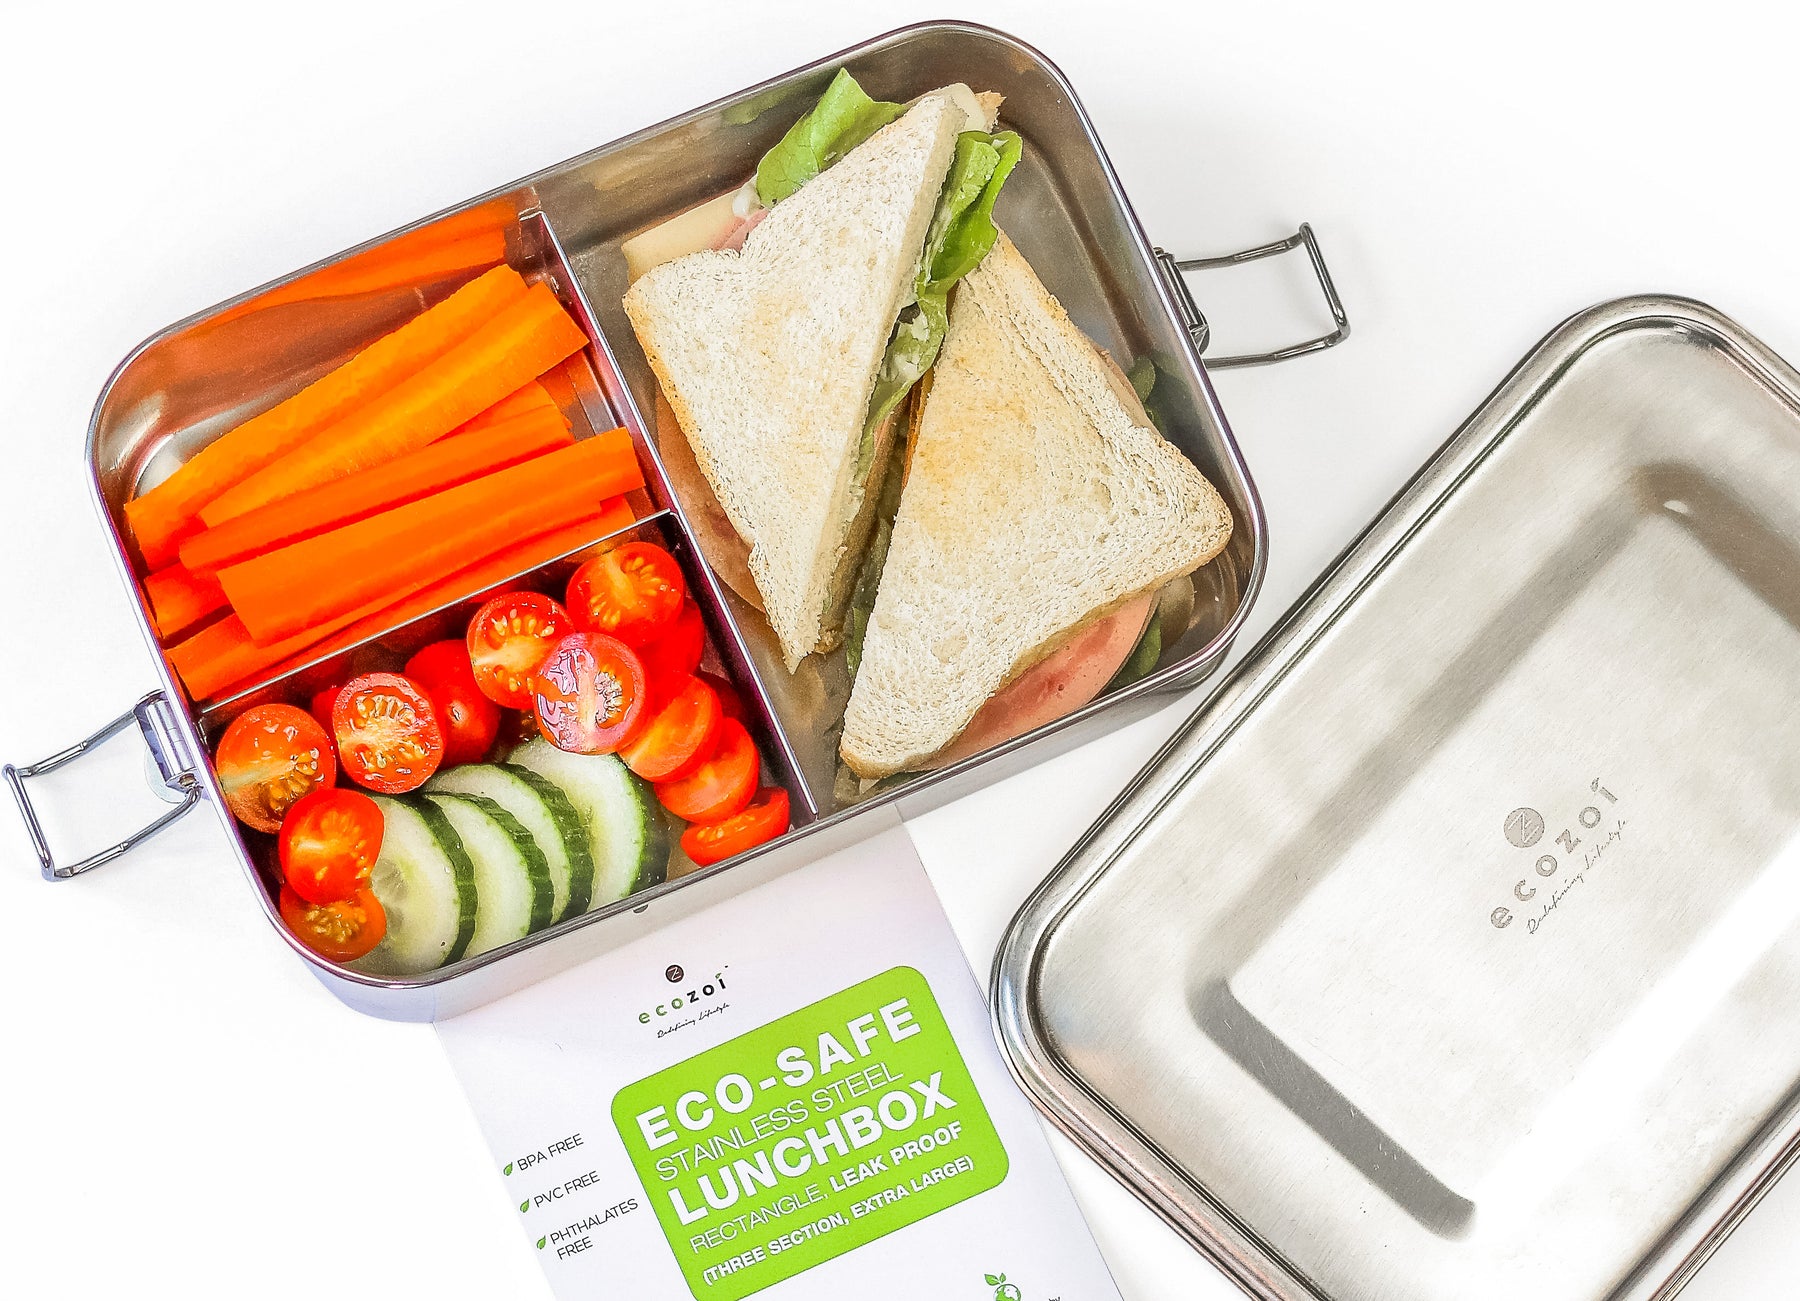 ecozoi Stainless Steel Lunch Box, 5 Compartment, Leak Proof, 50 oz